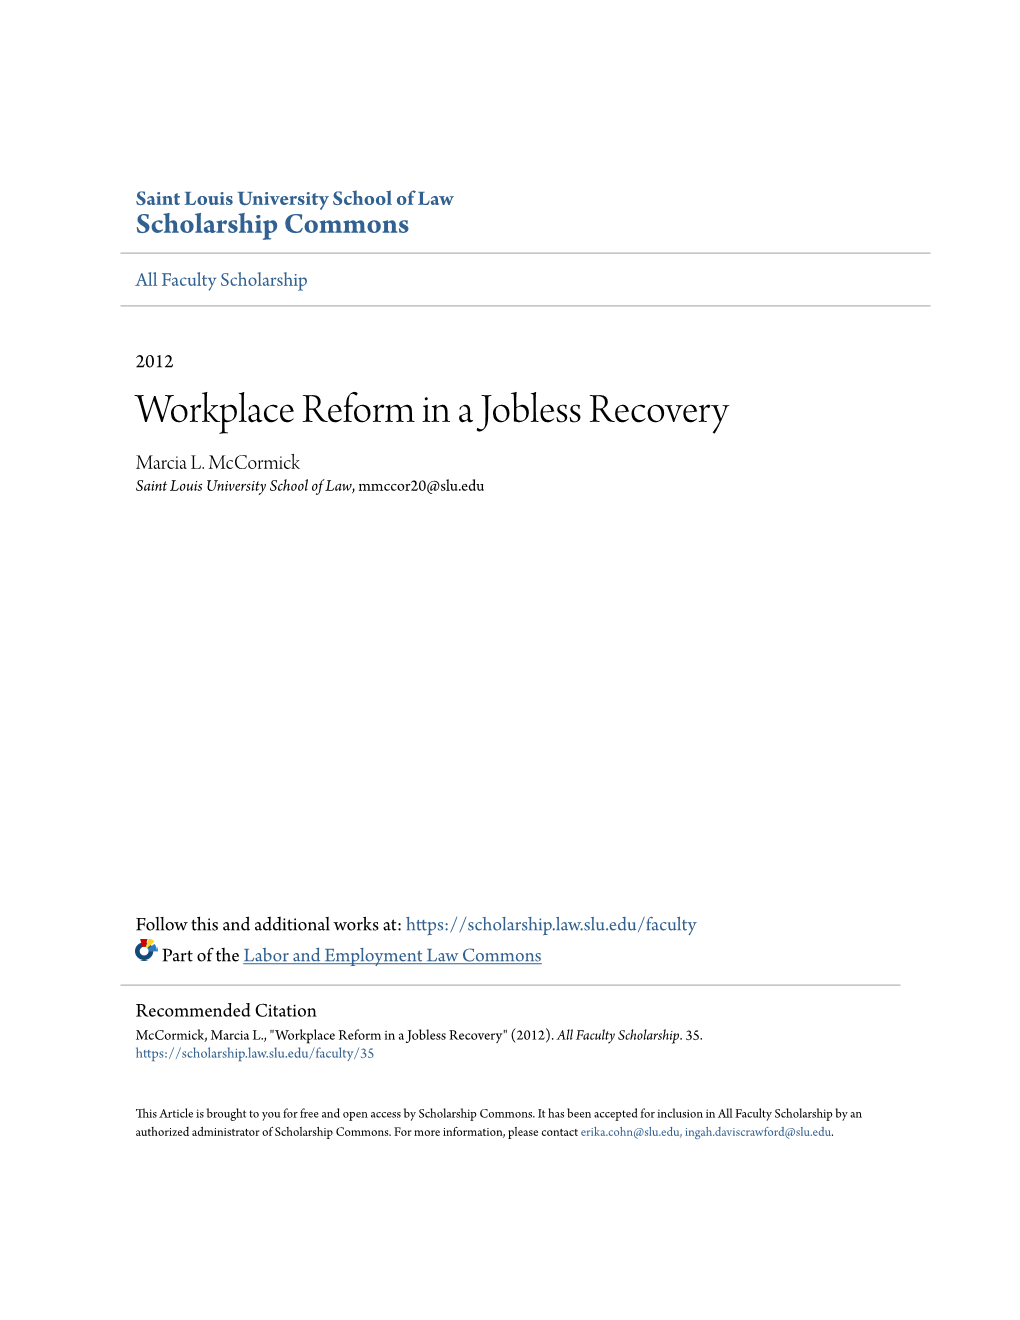 Workplace Reform in a Jobless Recovery Marcia L